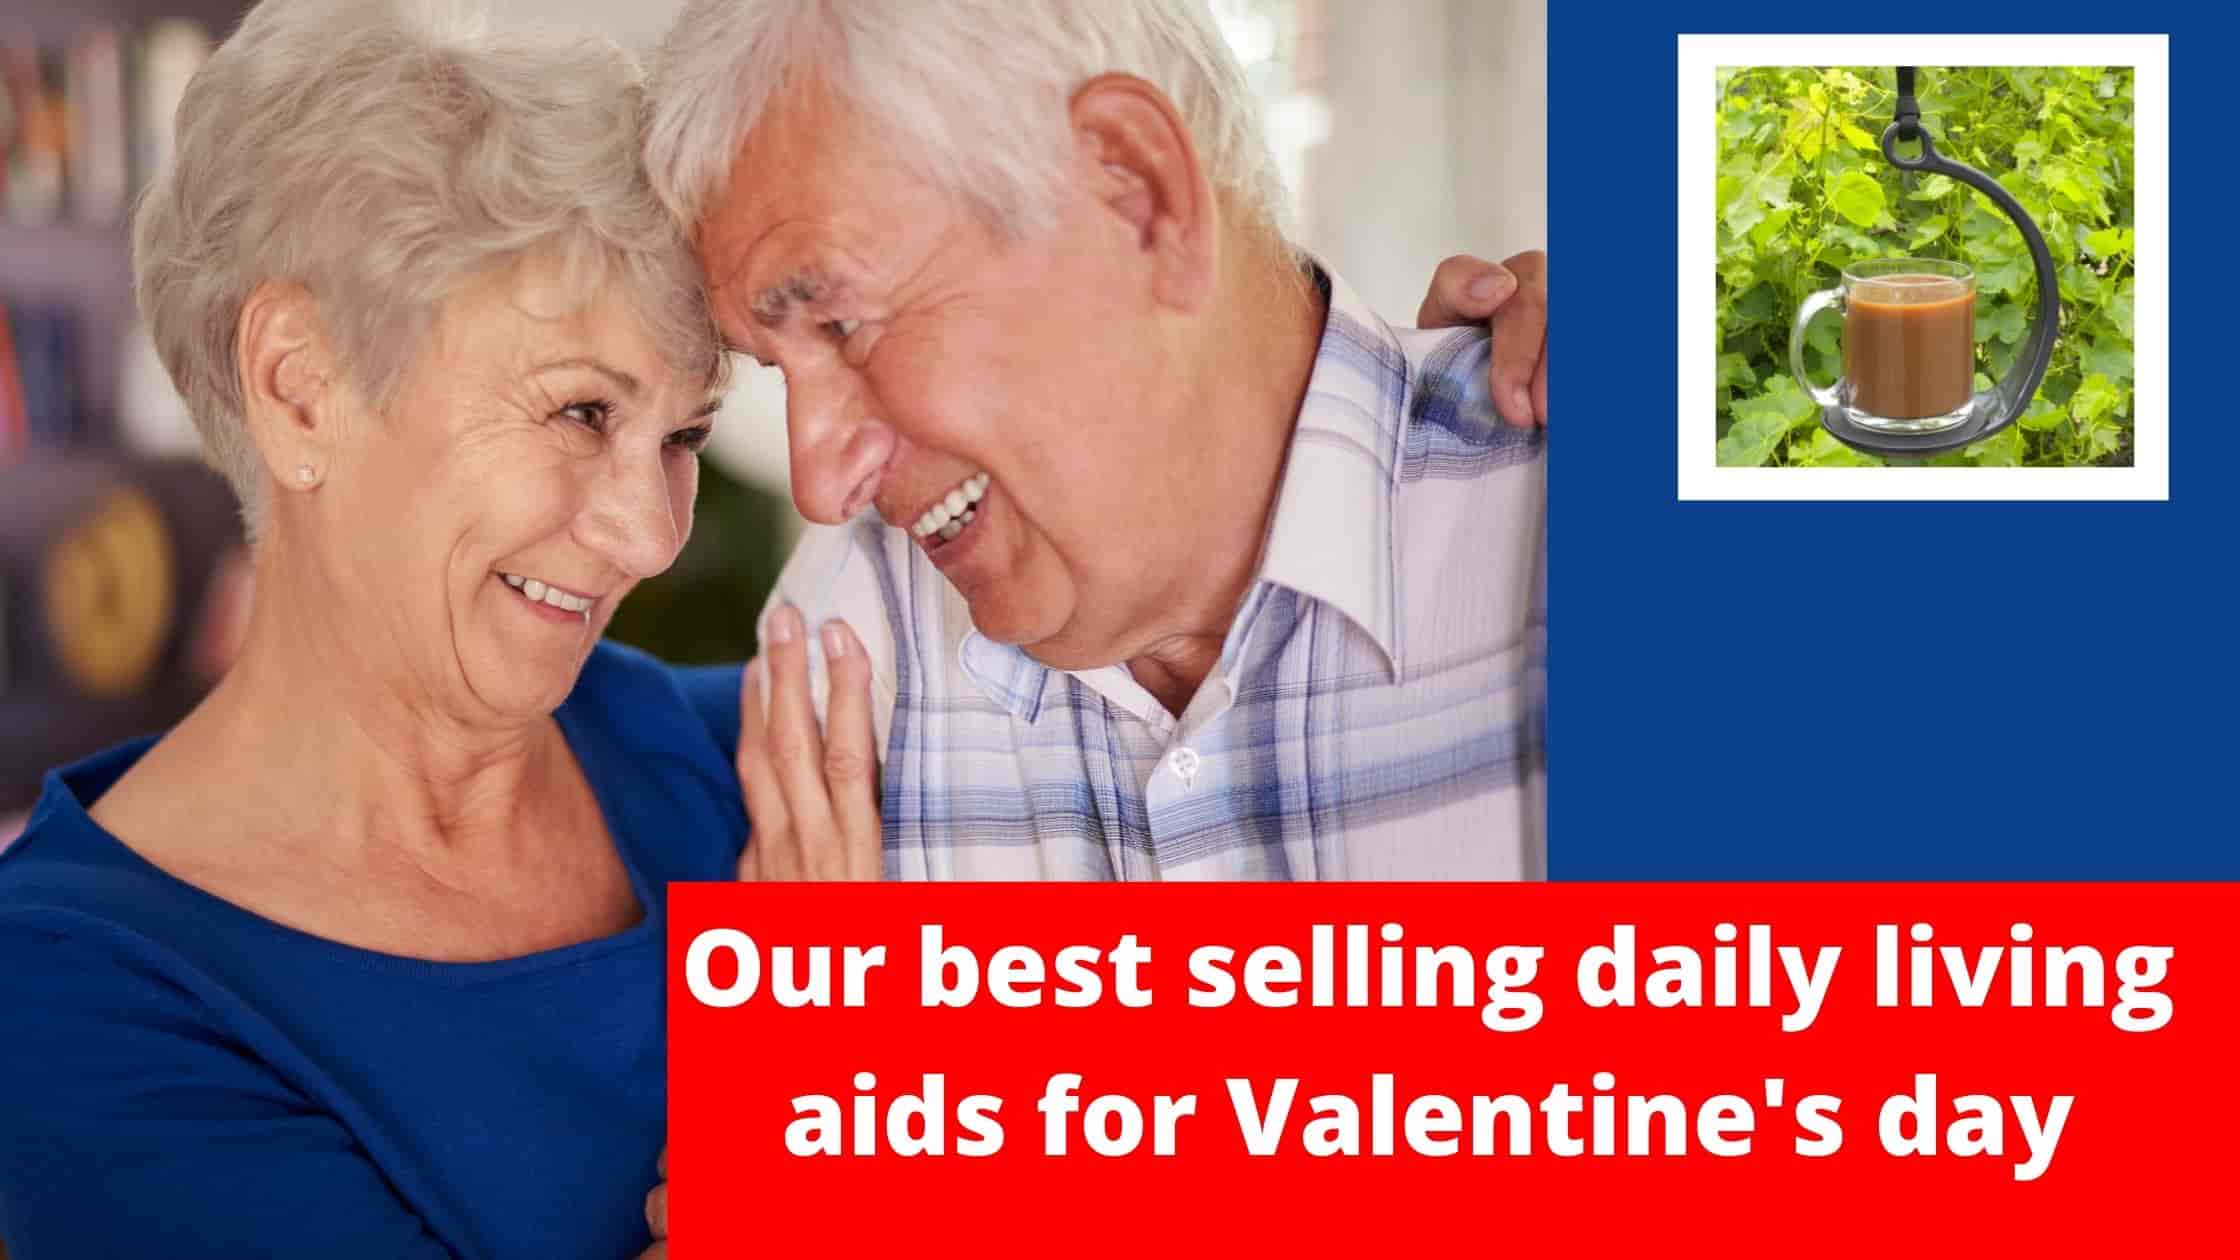 Our best selling daily living aids for Valentine's day